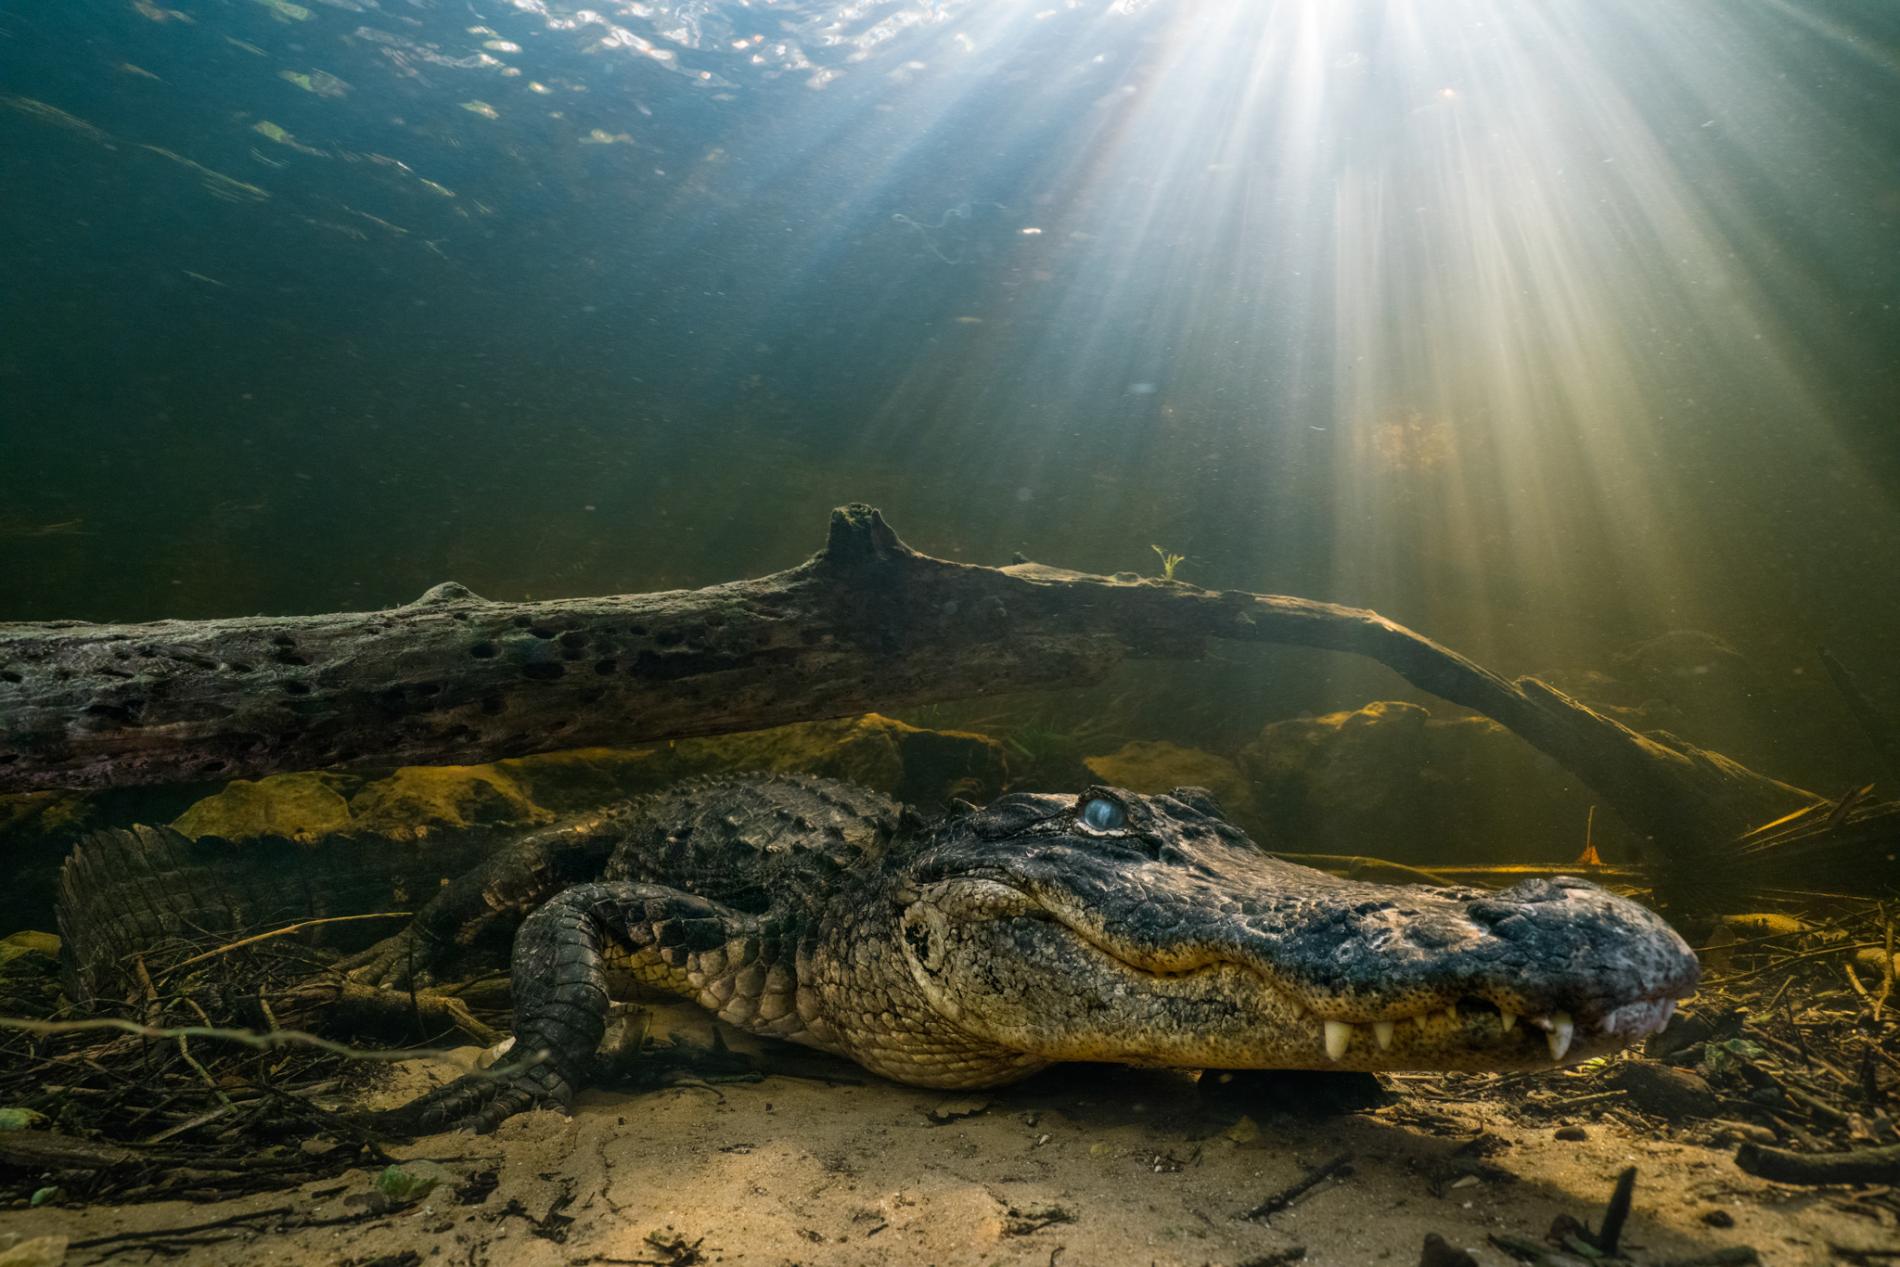 Alligators can regrow severed tails, excellent-searching scientists